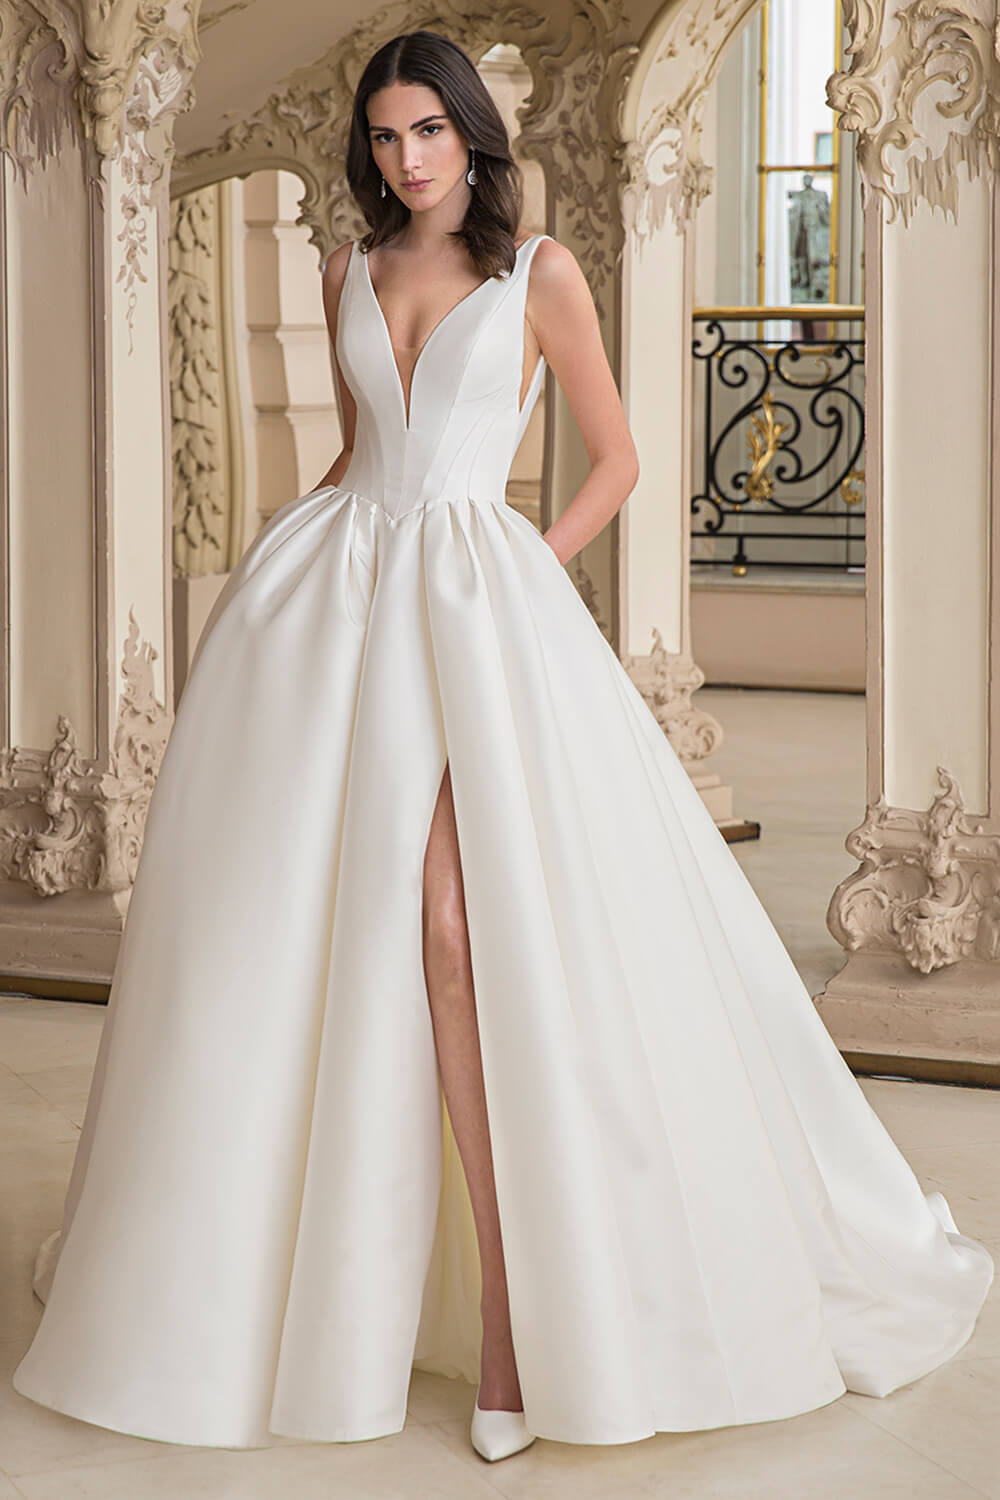 A-line gown with side slit